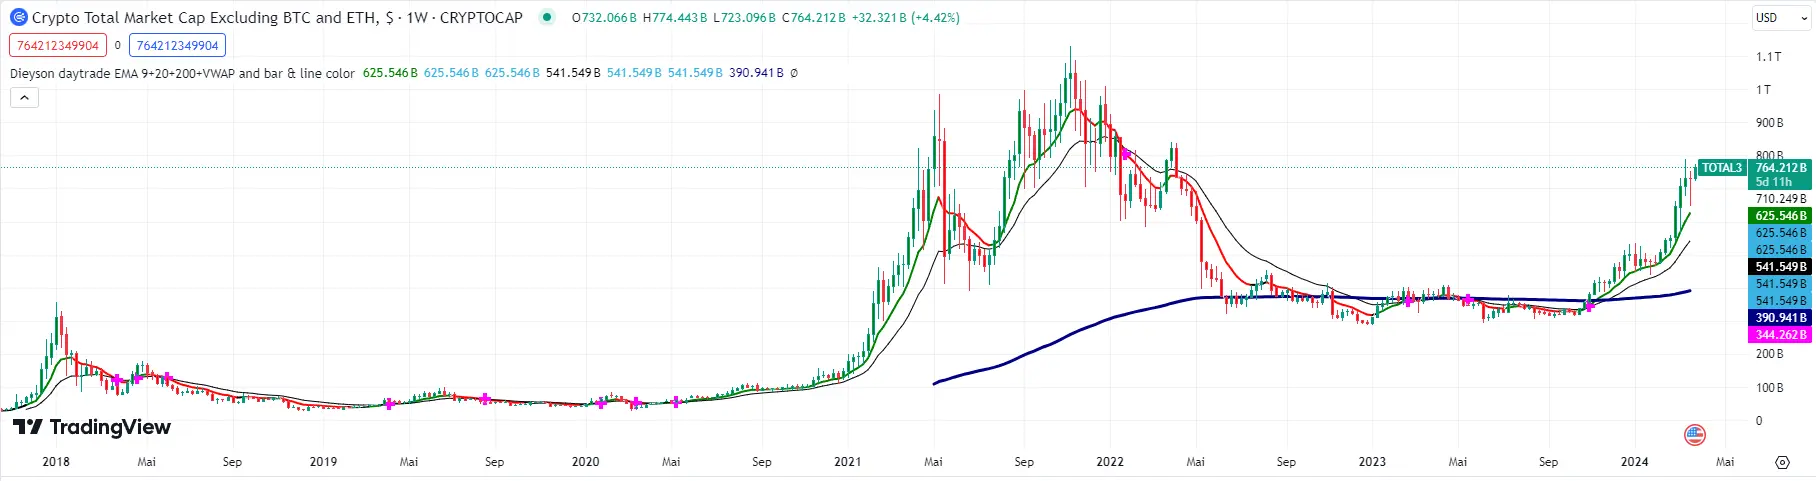 TOTAL3 Chart seit 2018 in USD, Quelle: TradingView